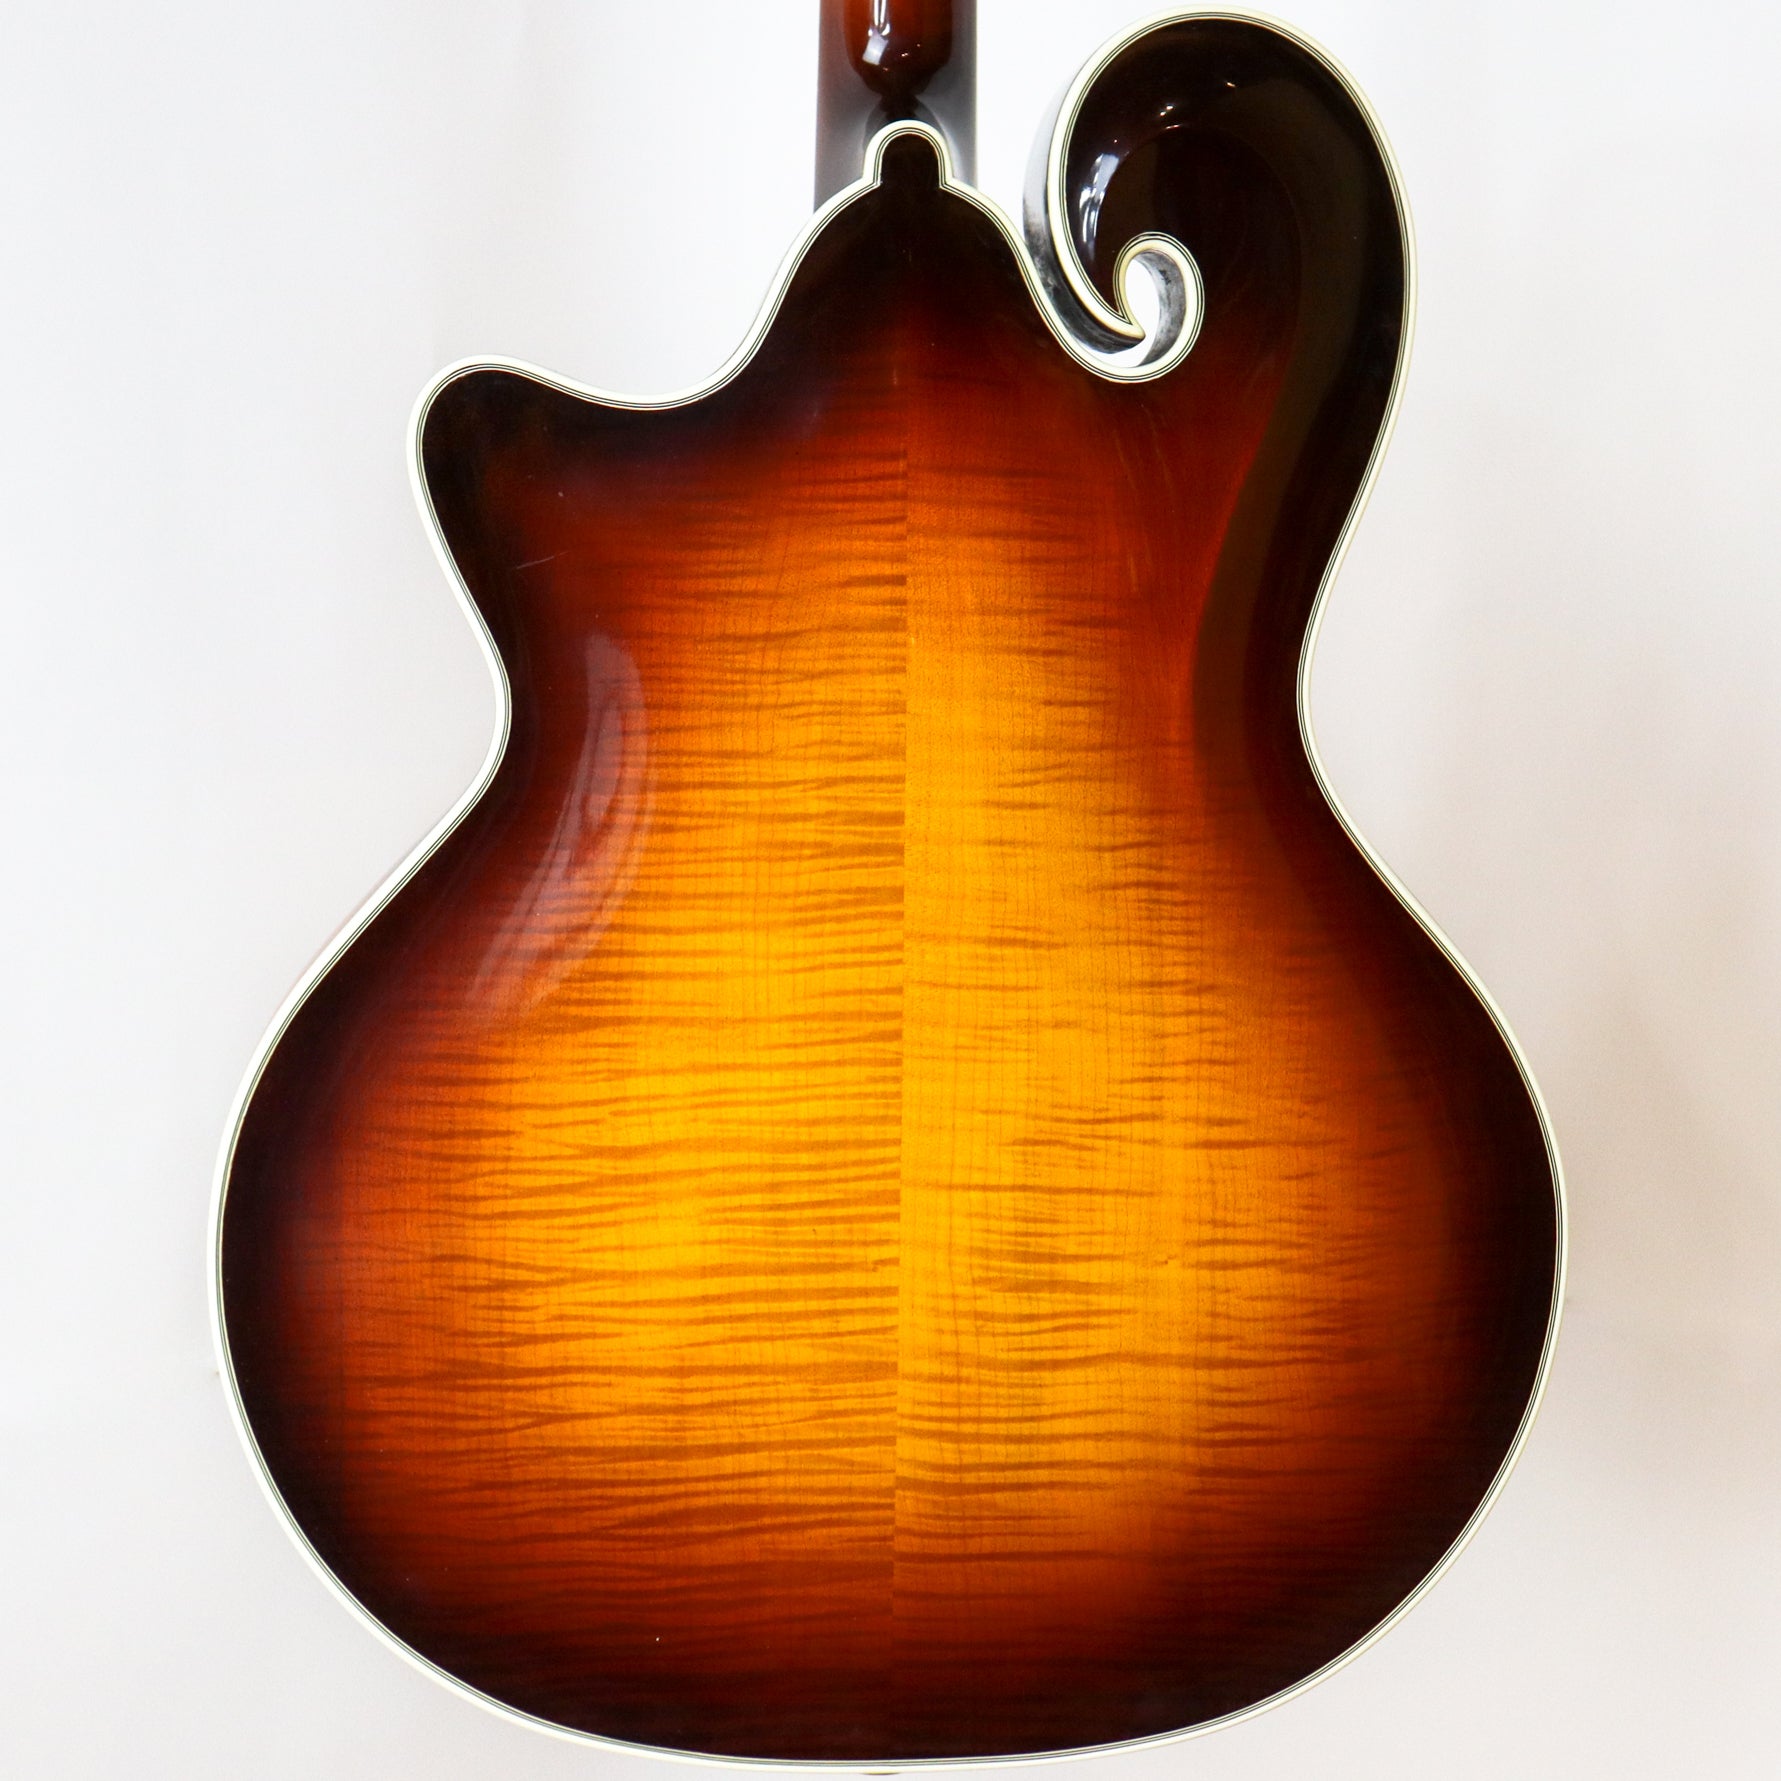 Monteleone 1994 Grand Artist #147 (First One Ever Built)